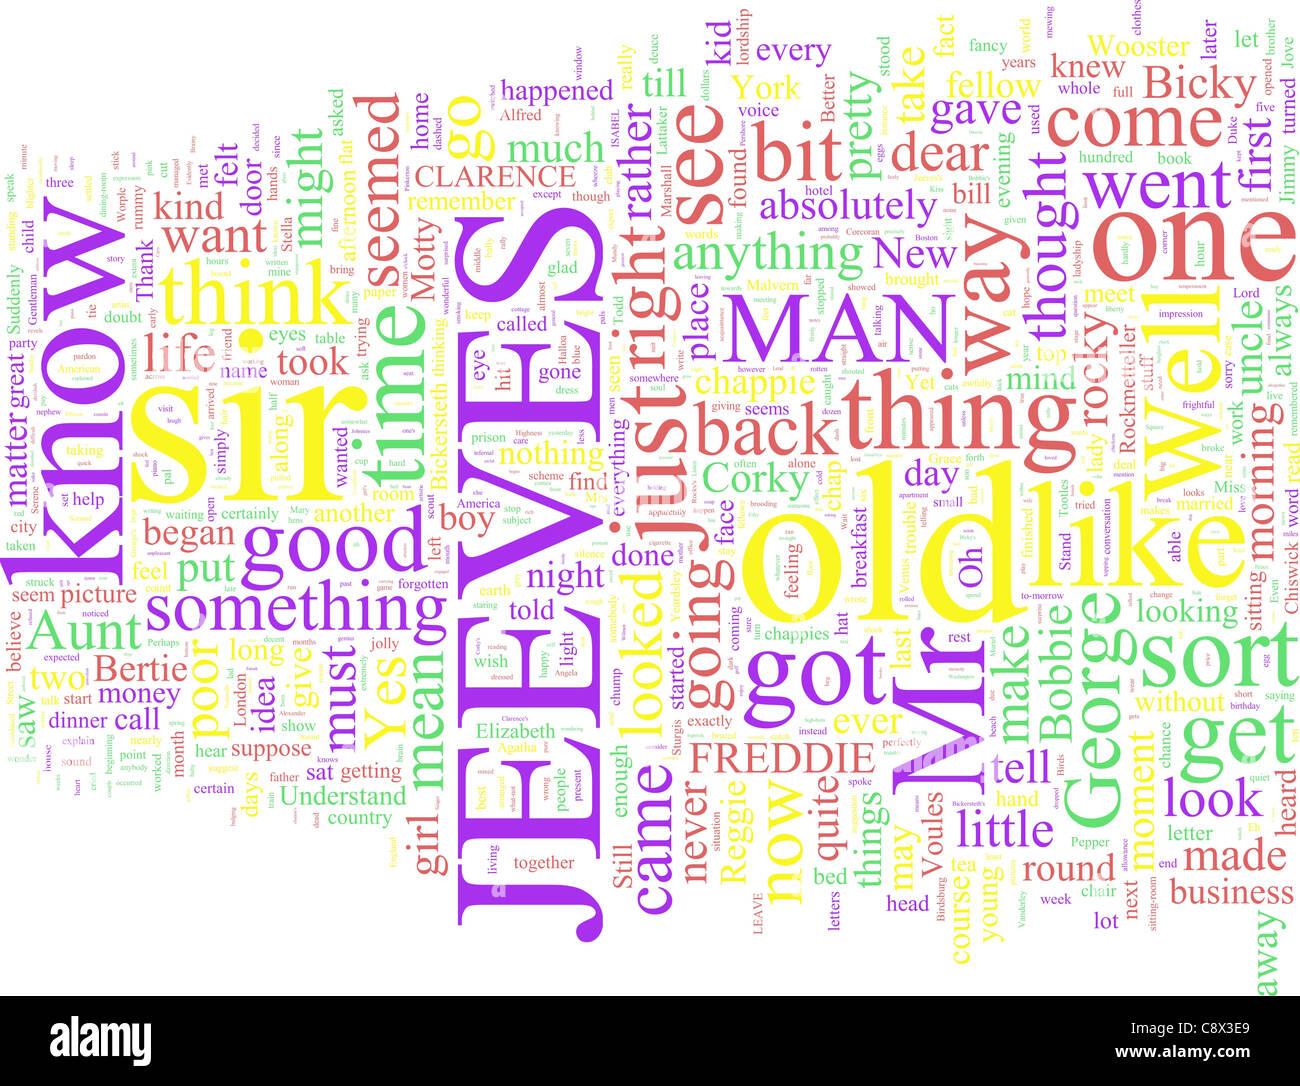 A Word Cloud Based on PG Wodehouse's Jeeves and Wooster Stories Stock Photo